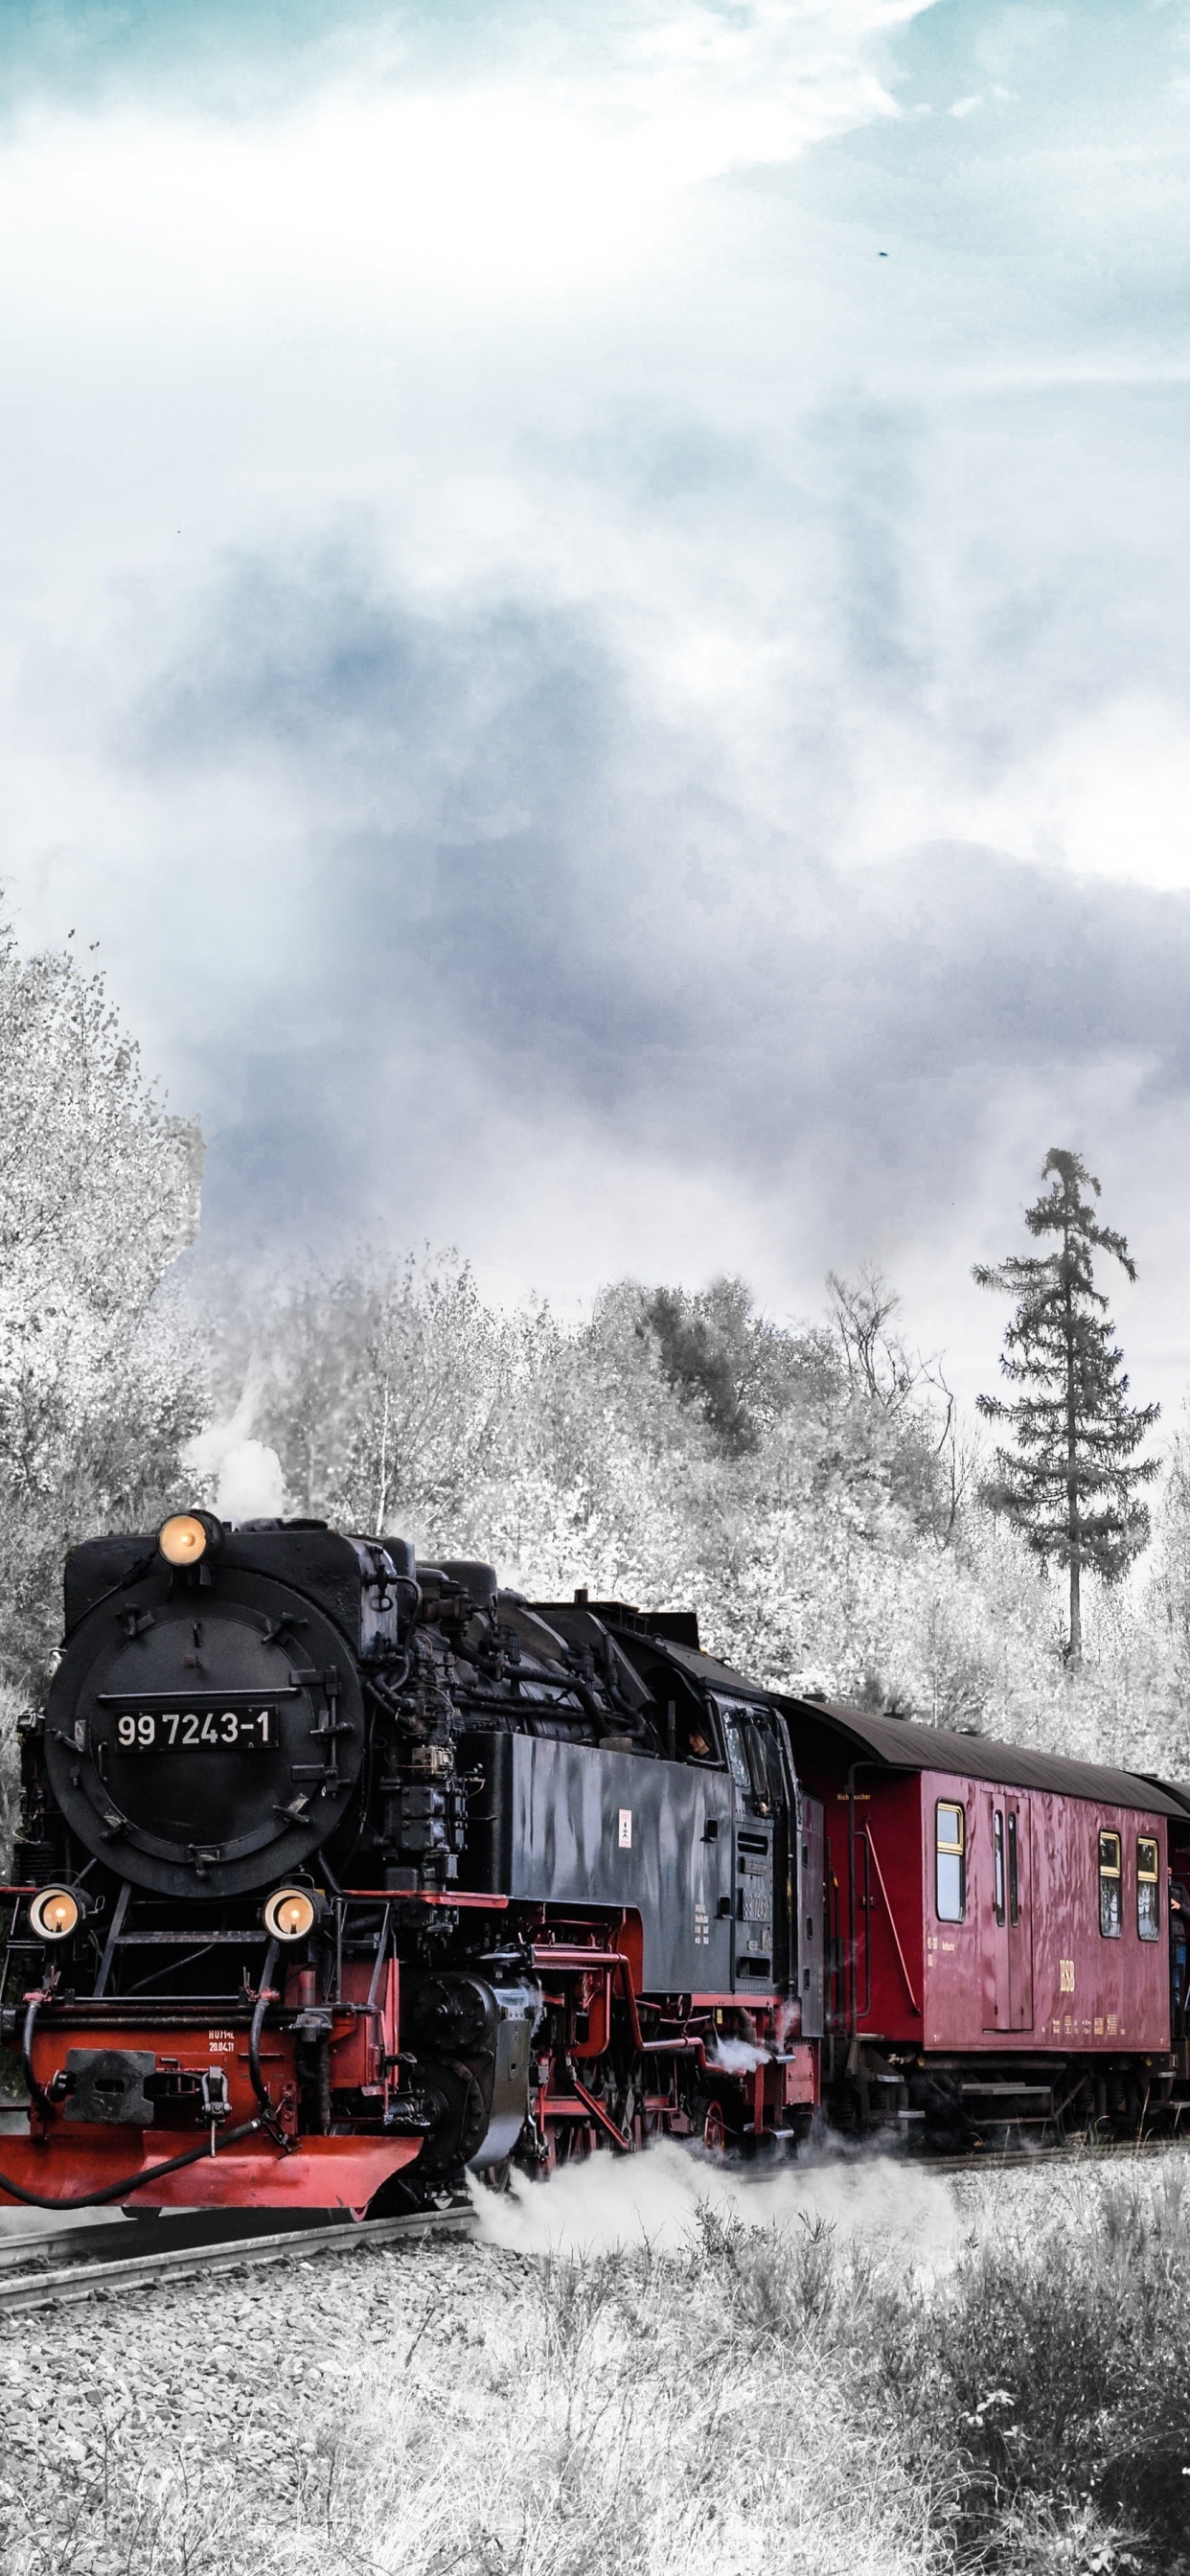 Red and Black Train on Rail Tracks Under Cloudy Sky. Wallpaper in 1242x2688 Resolution